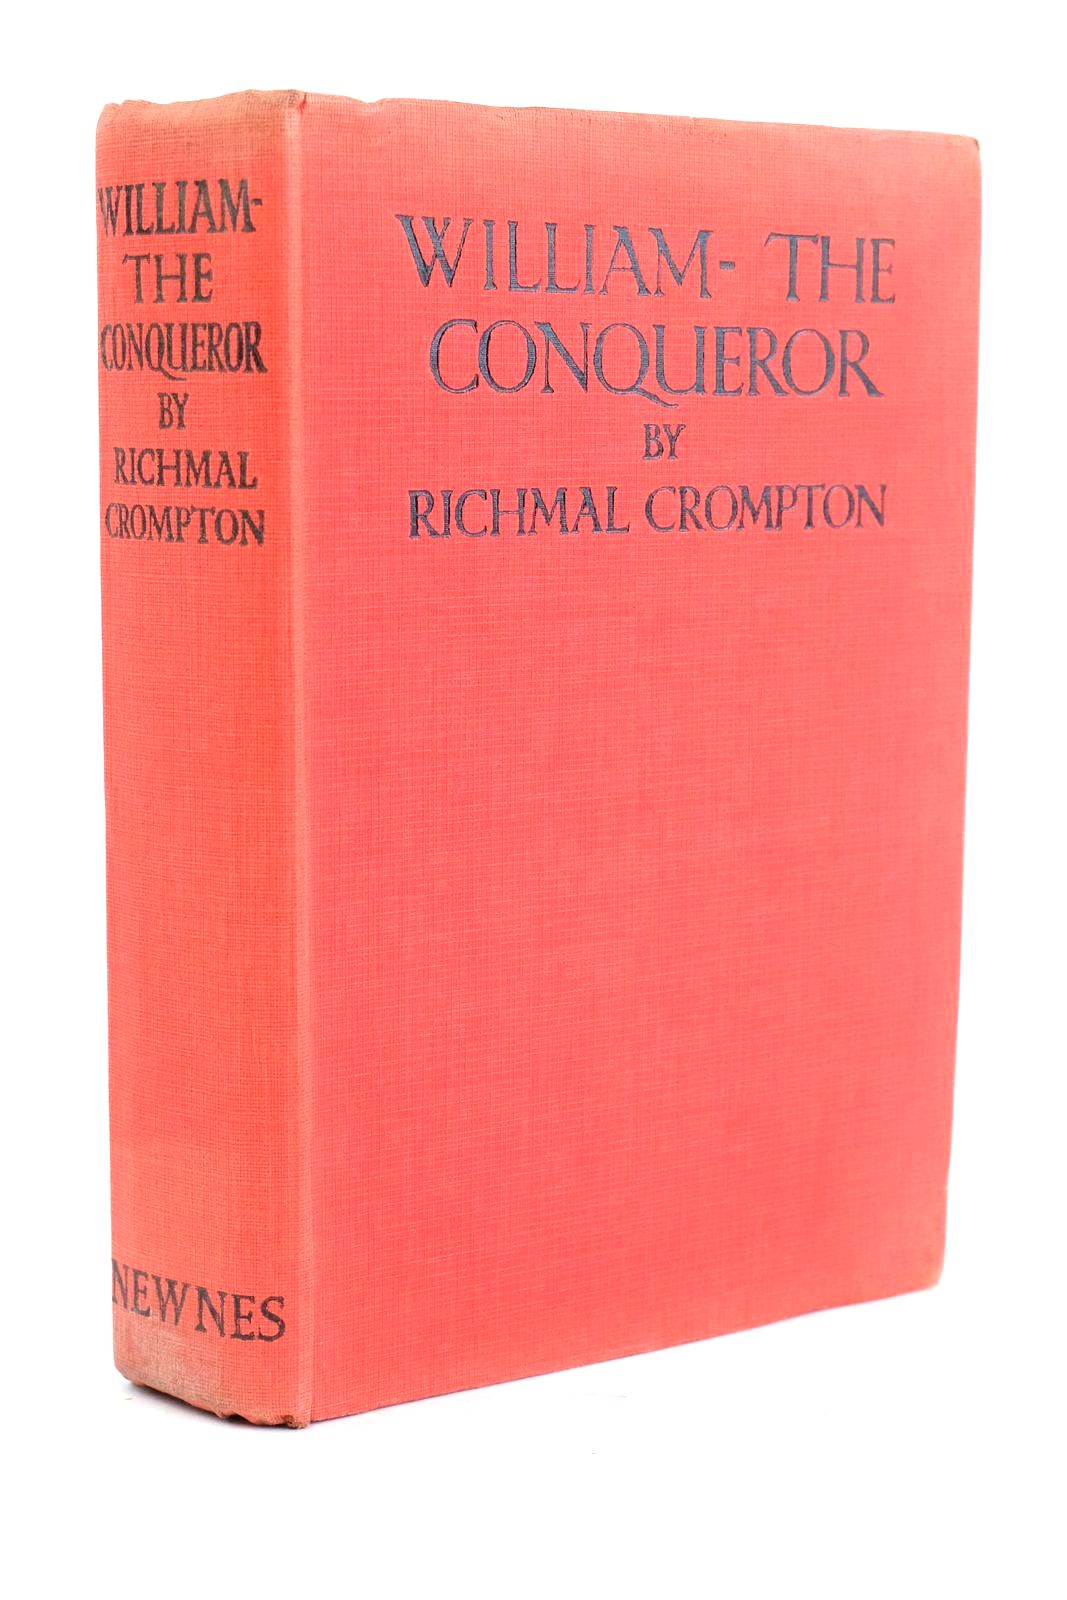 Photo of WILLIAM THE CONQUEROR written by Crompton, Richmal illustrated by Henry, Thomas published by George Newnes Limited (STOCK CODE: 1324576)  for sale by Stella & Rose's Books